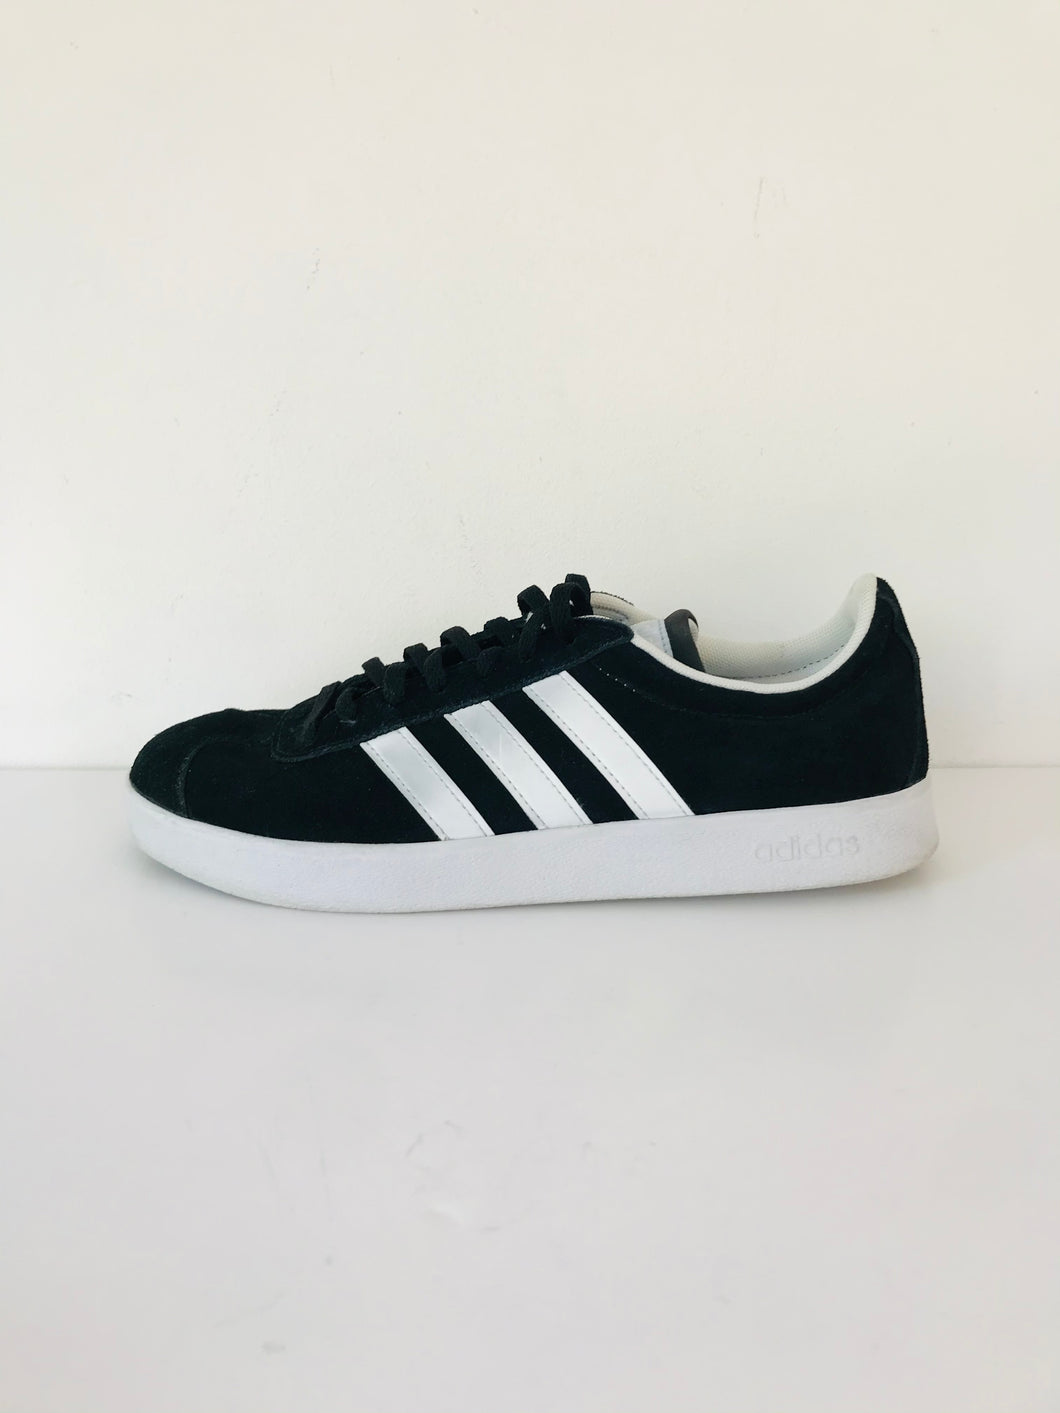 Adidas Women's Suede Leather Trainers | UK6 | Black